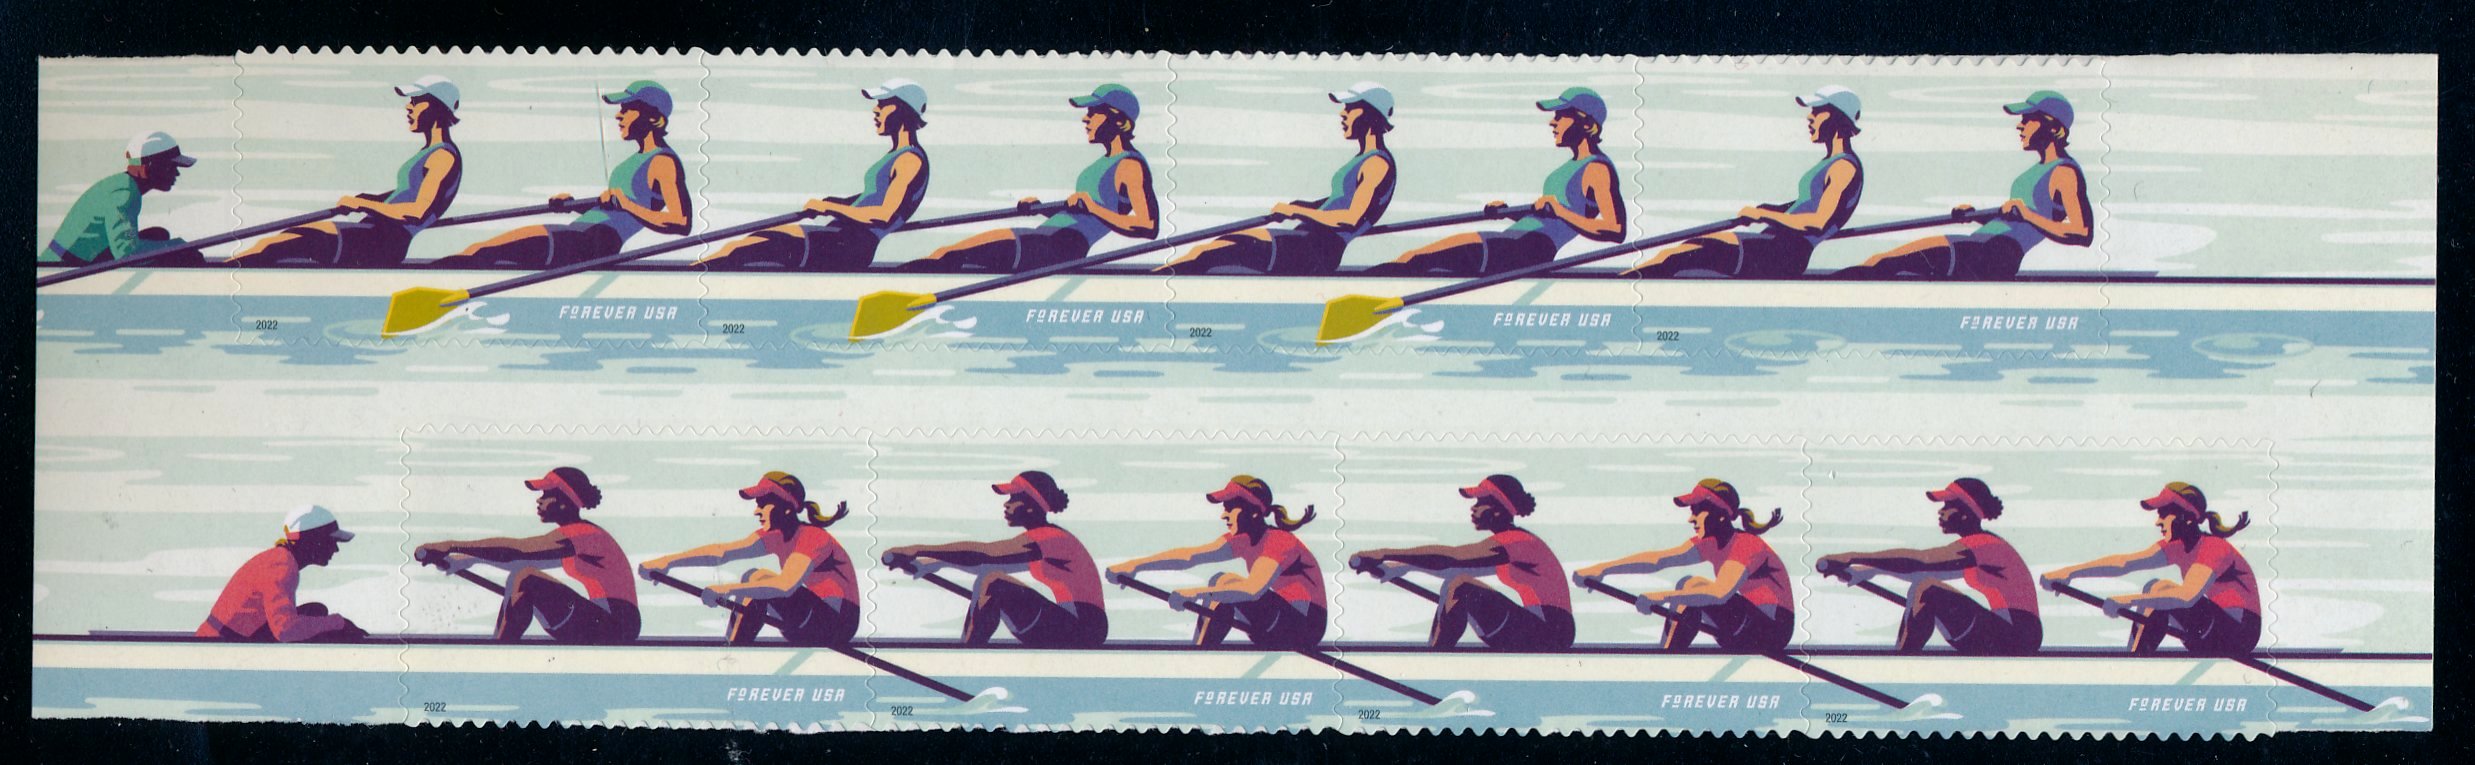 5694-5697blk Forever Woman Rowing Mint Block of 8 5694-5697blk